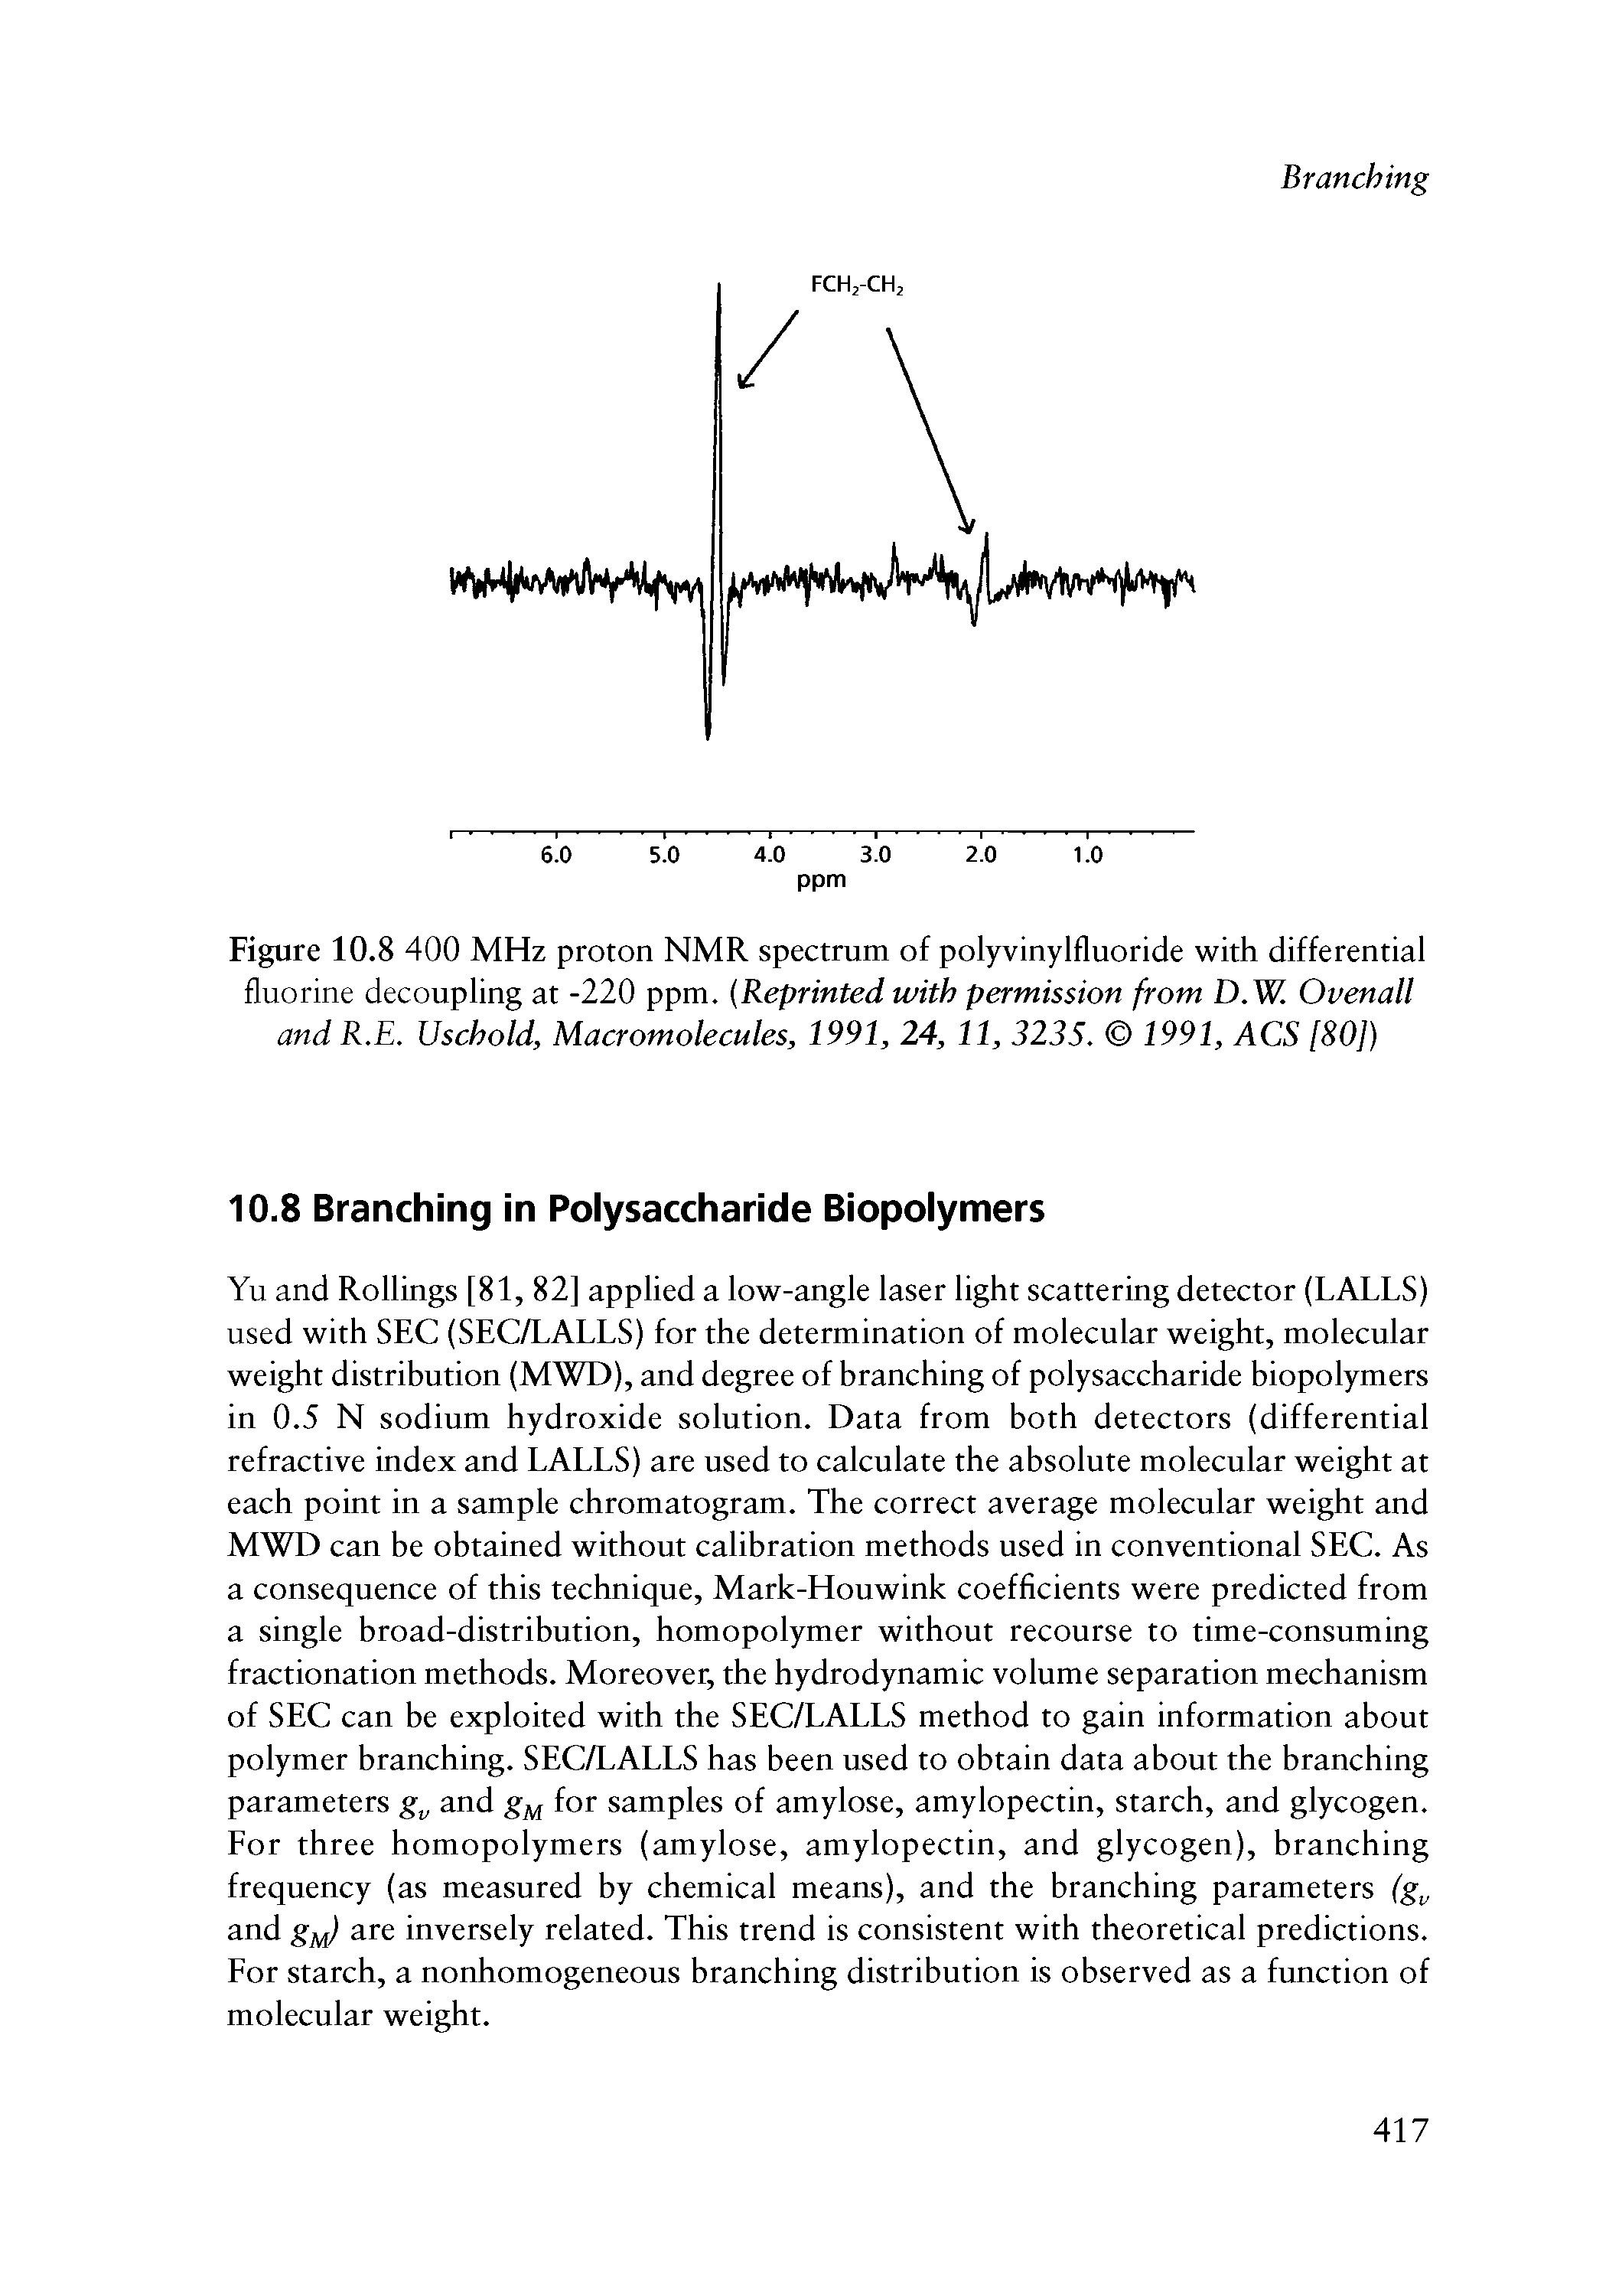 Figure 10 8 400 MHz proton NMR spectrum of polyvinylfluoride with differential fluorine decoupling at -220 ppm. (Reprinted with permission from D.W. Ovenall and R.E. Uschold, Macromolecules, 1991, 24, 11, 323S. 1991 ACS [80])...